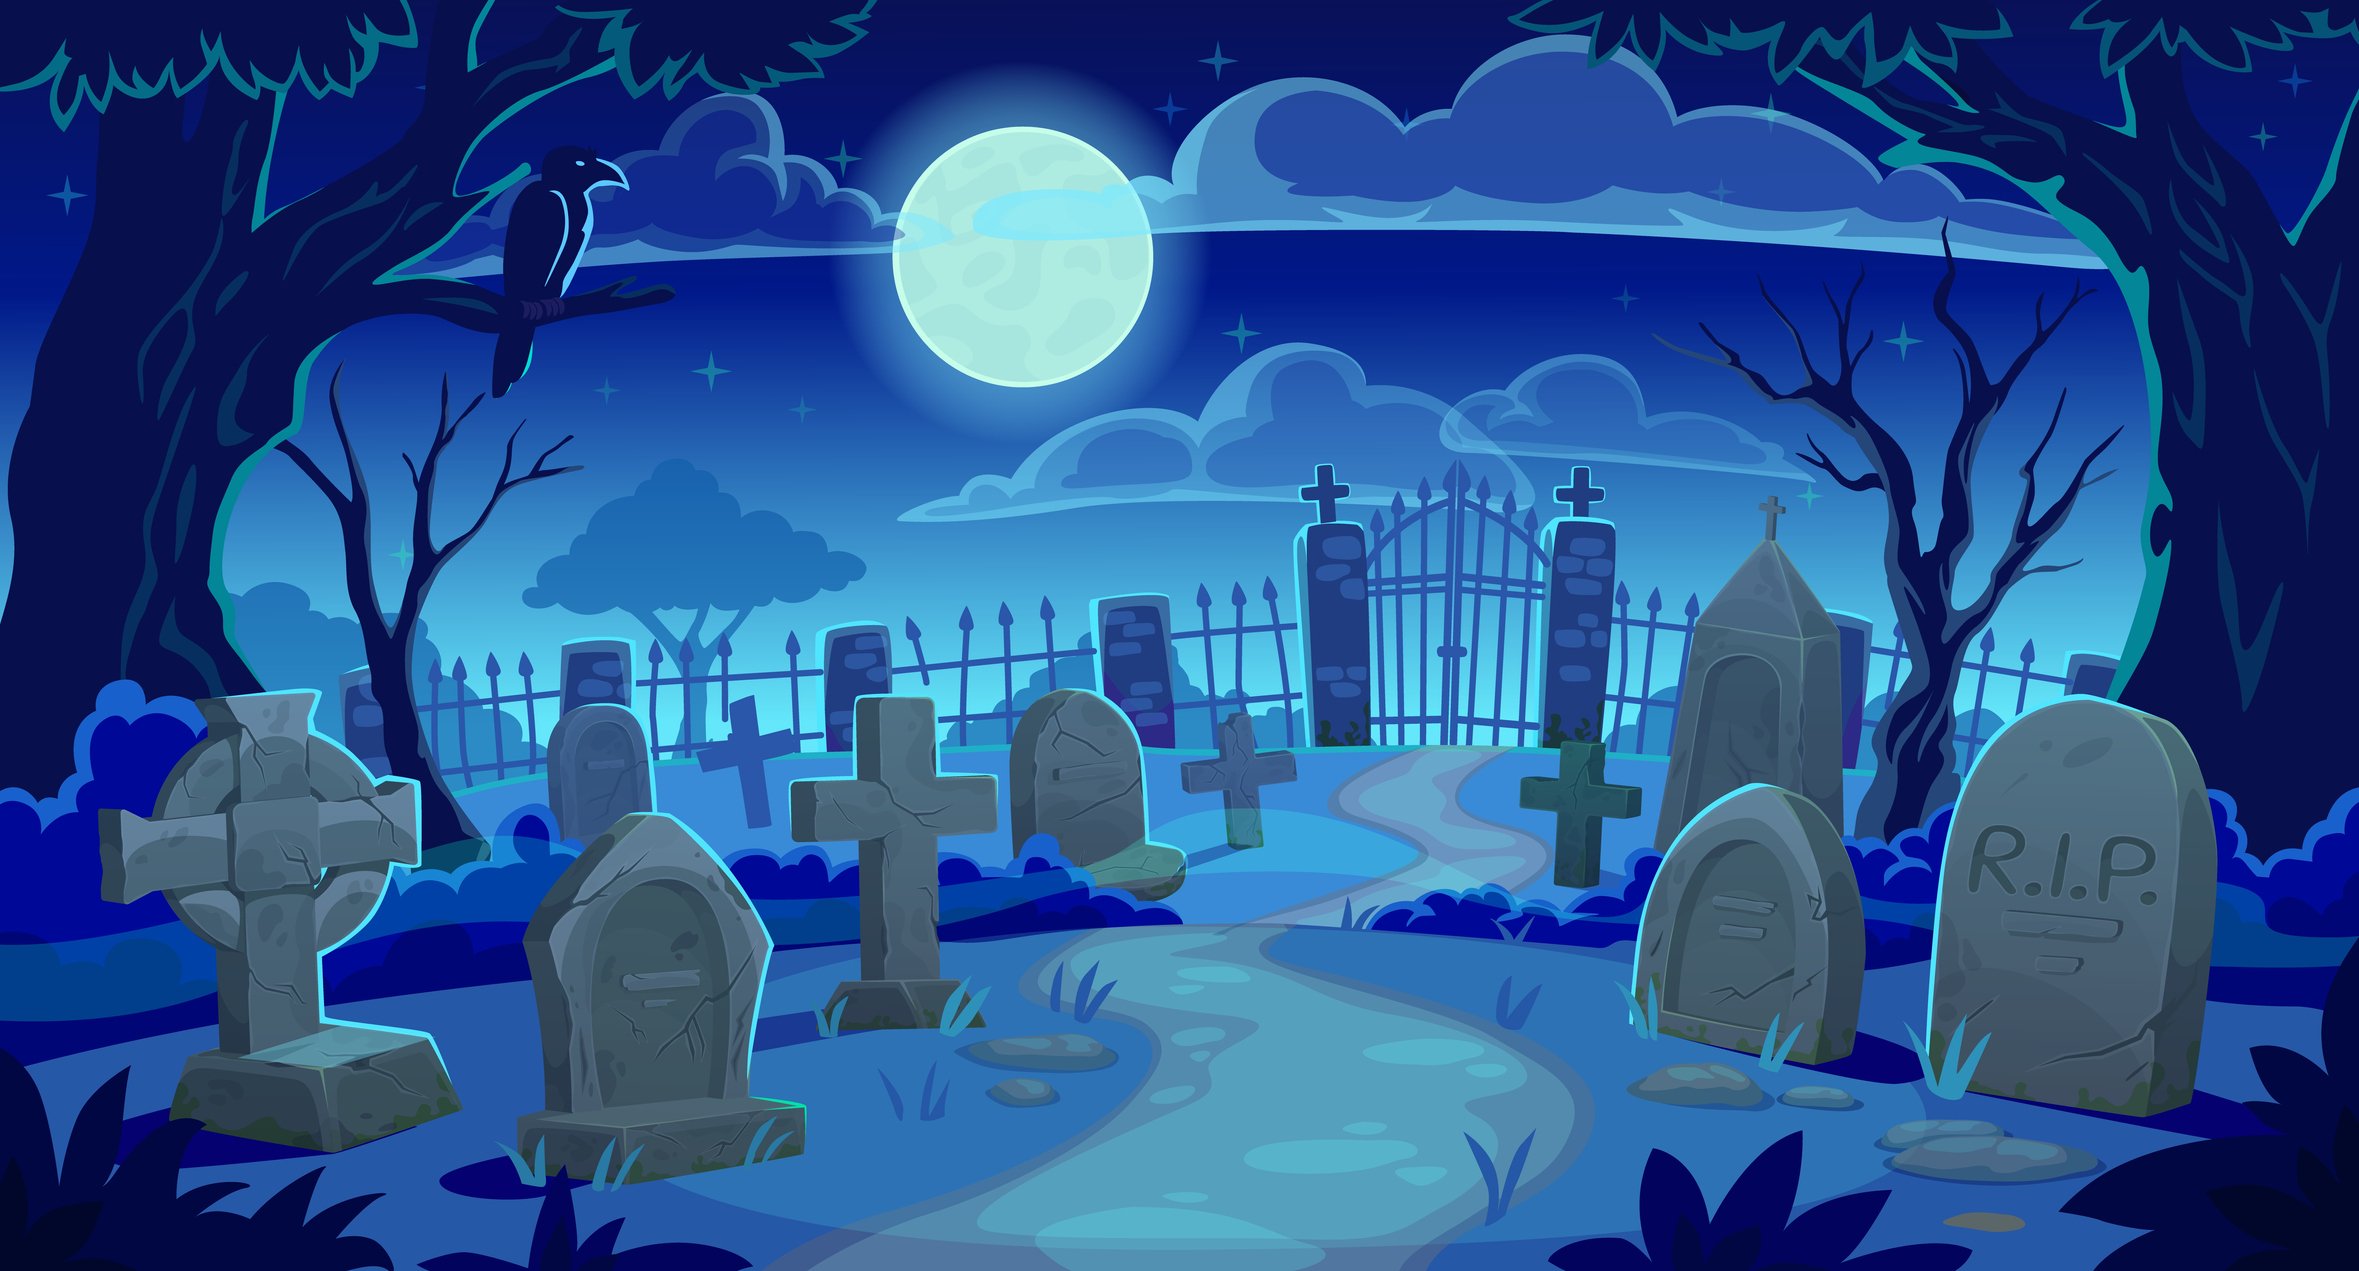 Graphic image of a graveyard with tombstones a full moon and a raven perched on a branch